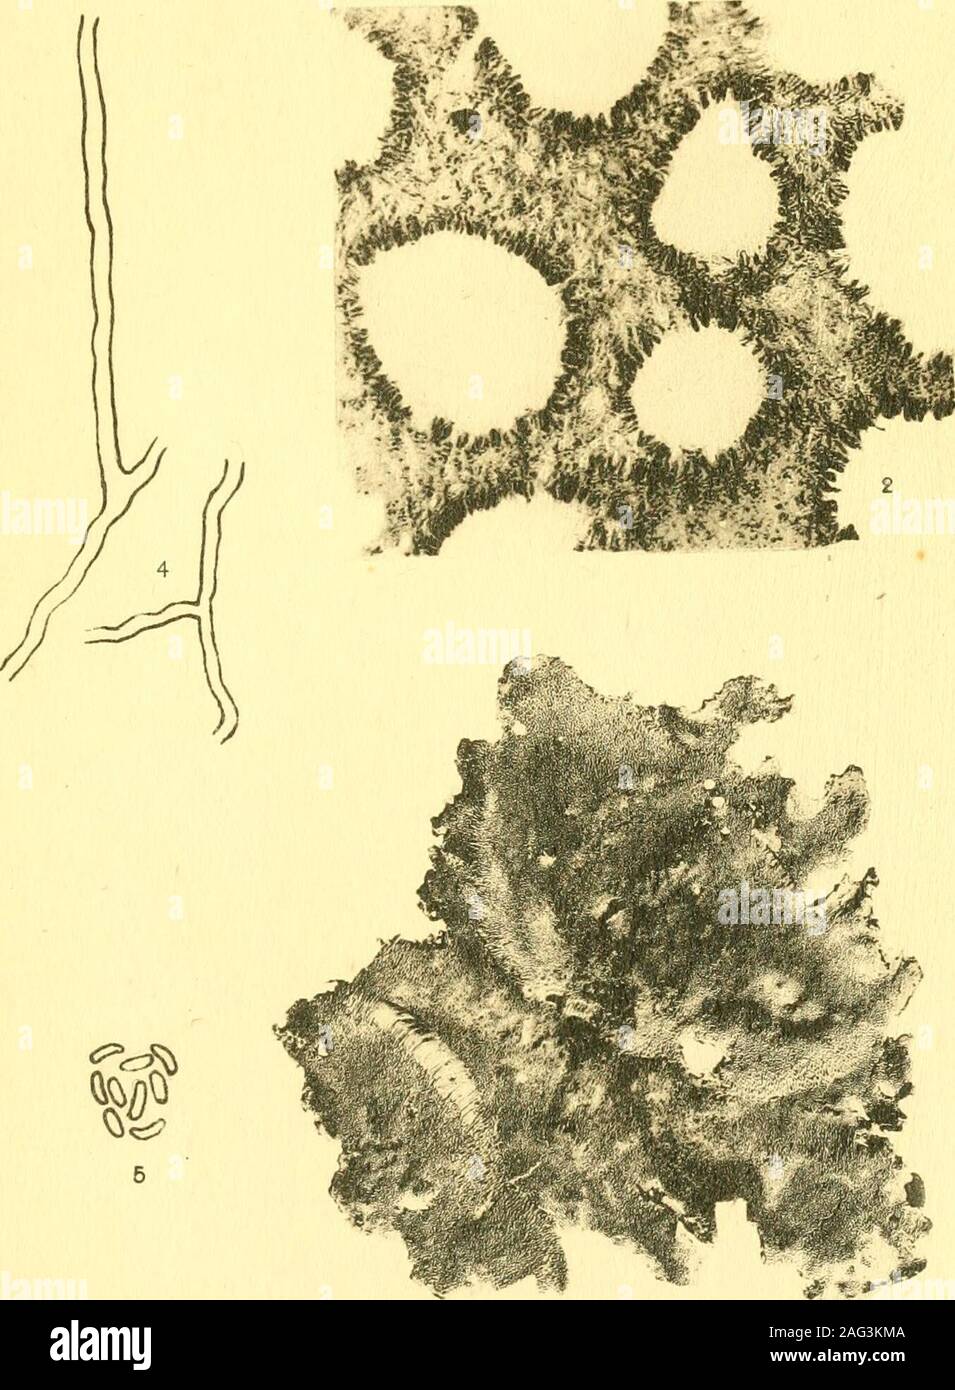 . Report of the State Entomologist on injurious and other insects of the state of New York. &lt;i. Fig. 1-5 PORIA SULPHURELLA (Peck) Sacc.Fig. 6 PORIA FIMBRIATELLA (Peck) Sacc. Plate 23 i6s Daedalea siilphurella Peck 1 Photograph of small fragments from the type collection, x 2. 2 Microphotograph of vertical section through the hymenium. X 160. 3 Hyphae from the subiculum. 4 Mature spores. 166 N. Y, State Botanists Report, 1917 :w*i Stock Photo